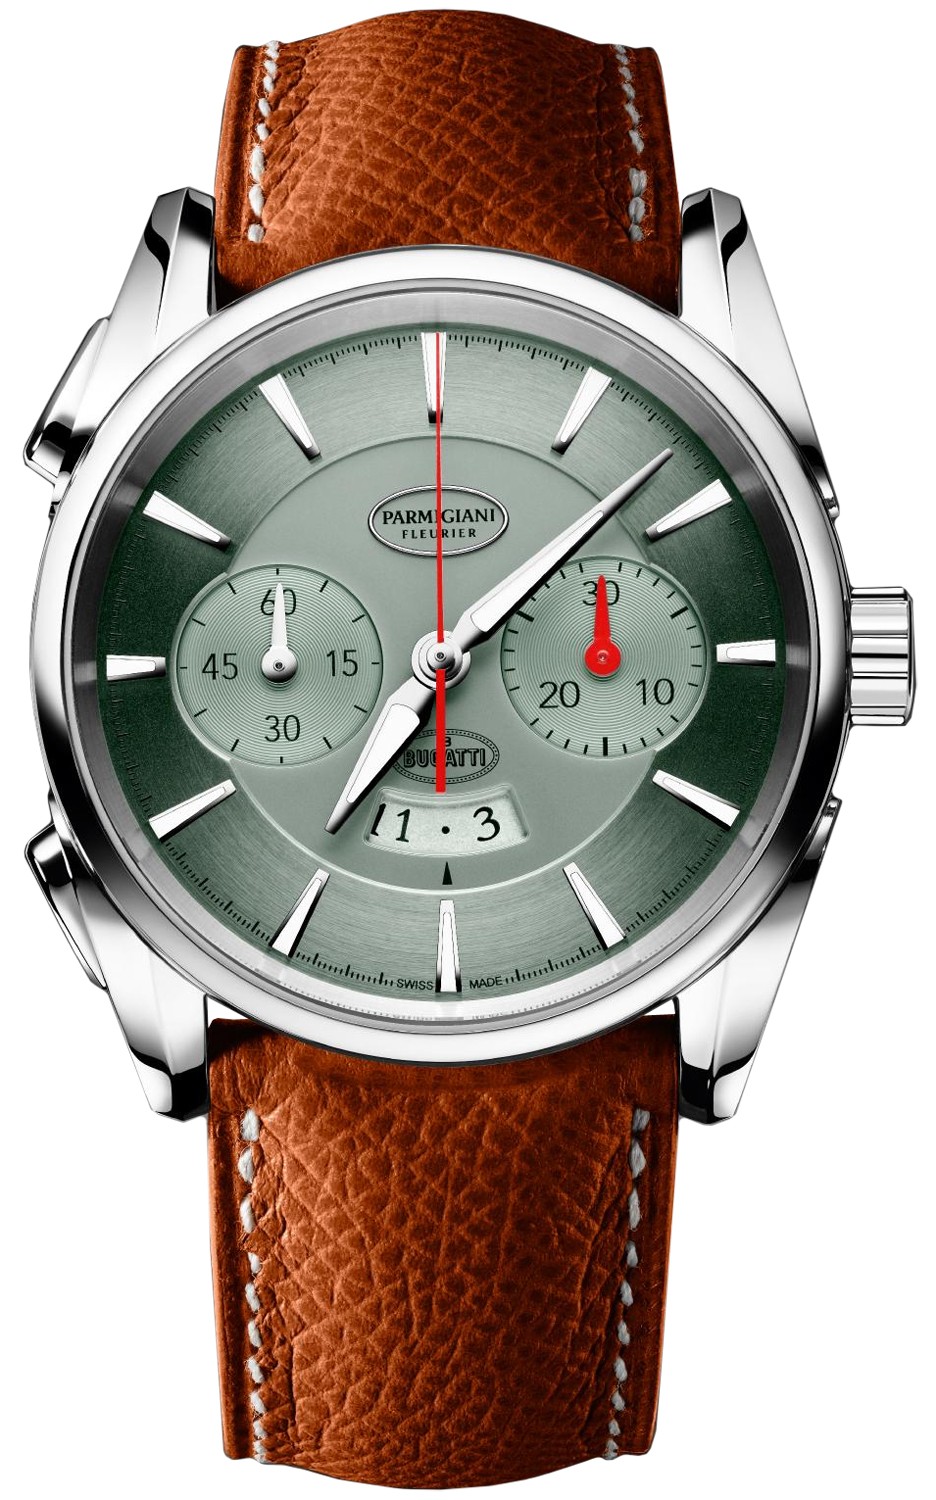 Bugatti Aerolithe Flyback Chronograph in Titanium and White Gold on Brown Calfskin Leather Strap with Pale Mint Green Dial